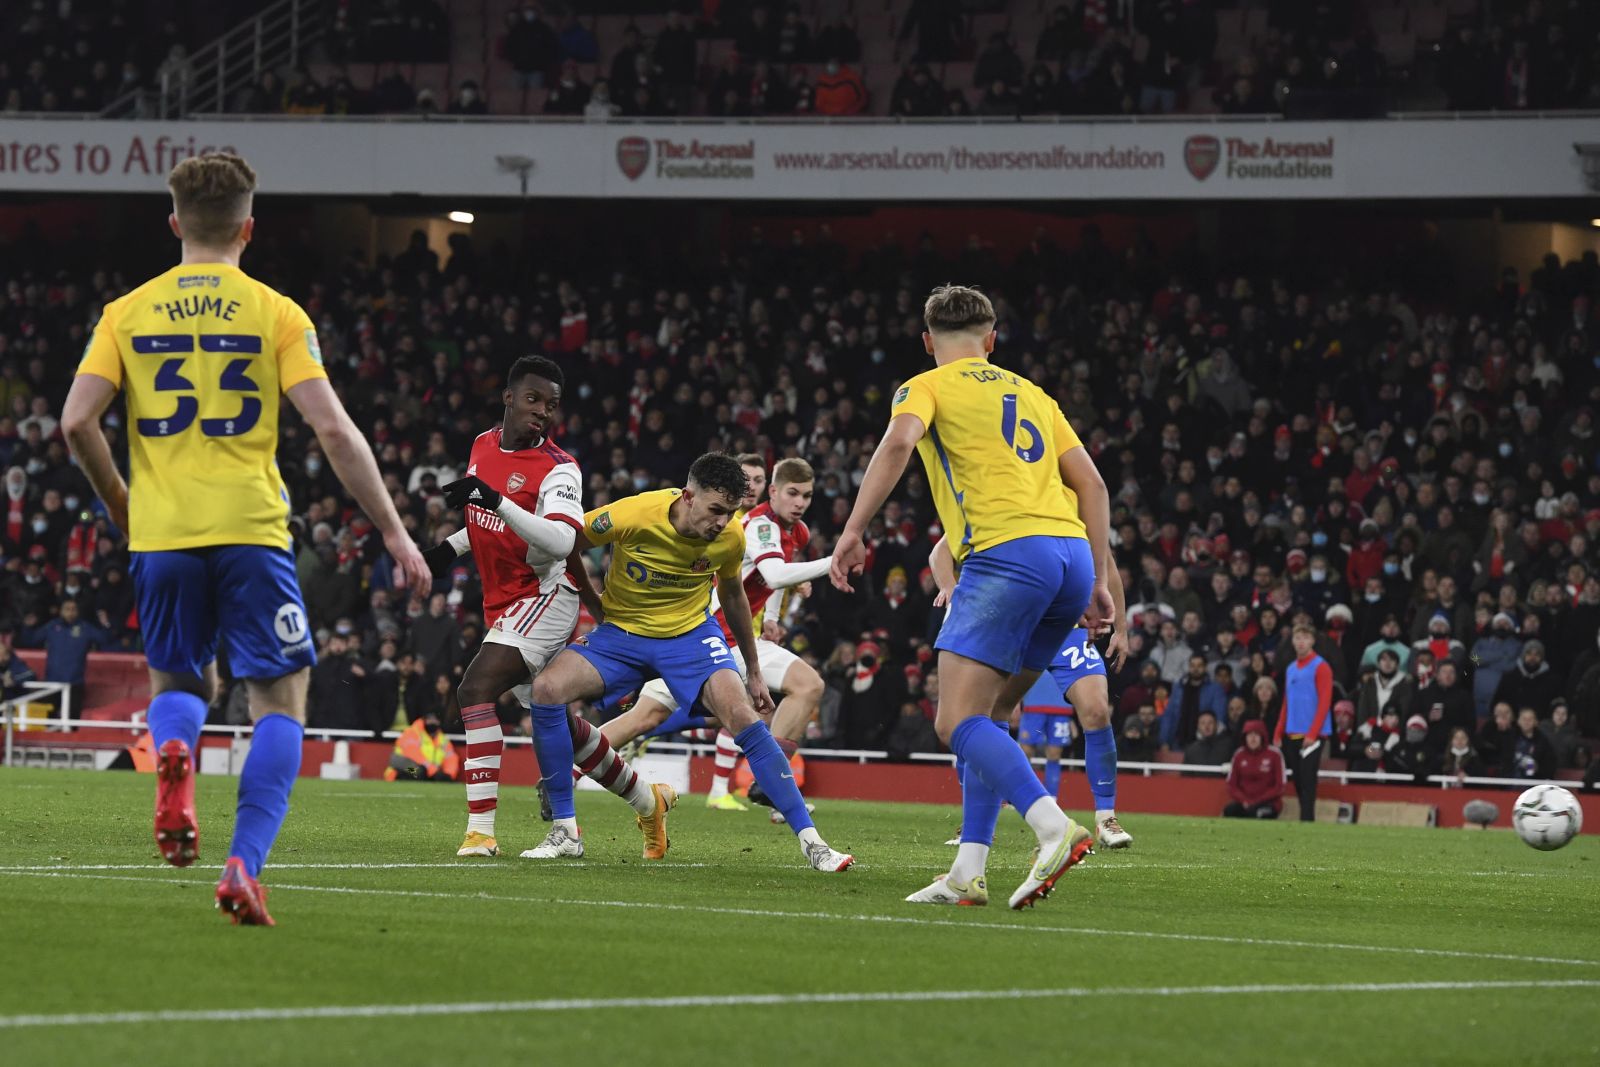 epa09653092 Arsenal's Edward Nketiah (2-L) scores the 4-1 goal during the English Carabao Cup quarter final between Arsenal FC and Sunderland AFC in London, Britain, 21 December 2021.  EPA/Facundo Arrizabalaga EDITORIAL USE ONLY. No use with unauthorized audio, video, data, fixture lists, club/league logos or 'live' services. Online in-match use limited to 120 images, no video emulation. No use in betting, games or single club/league/player publications